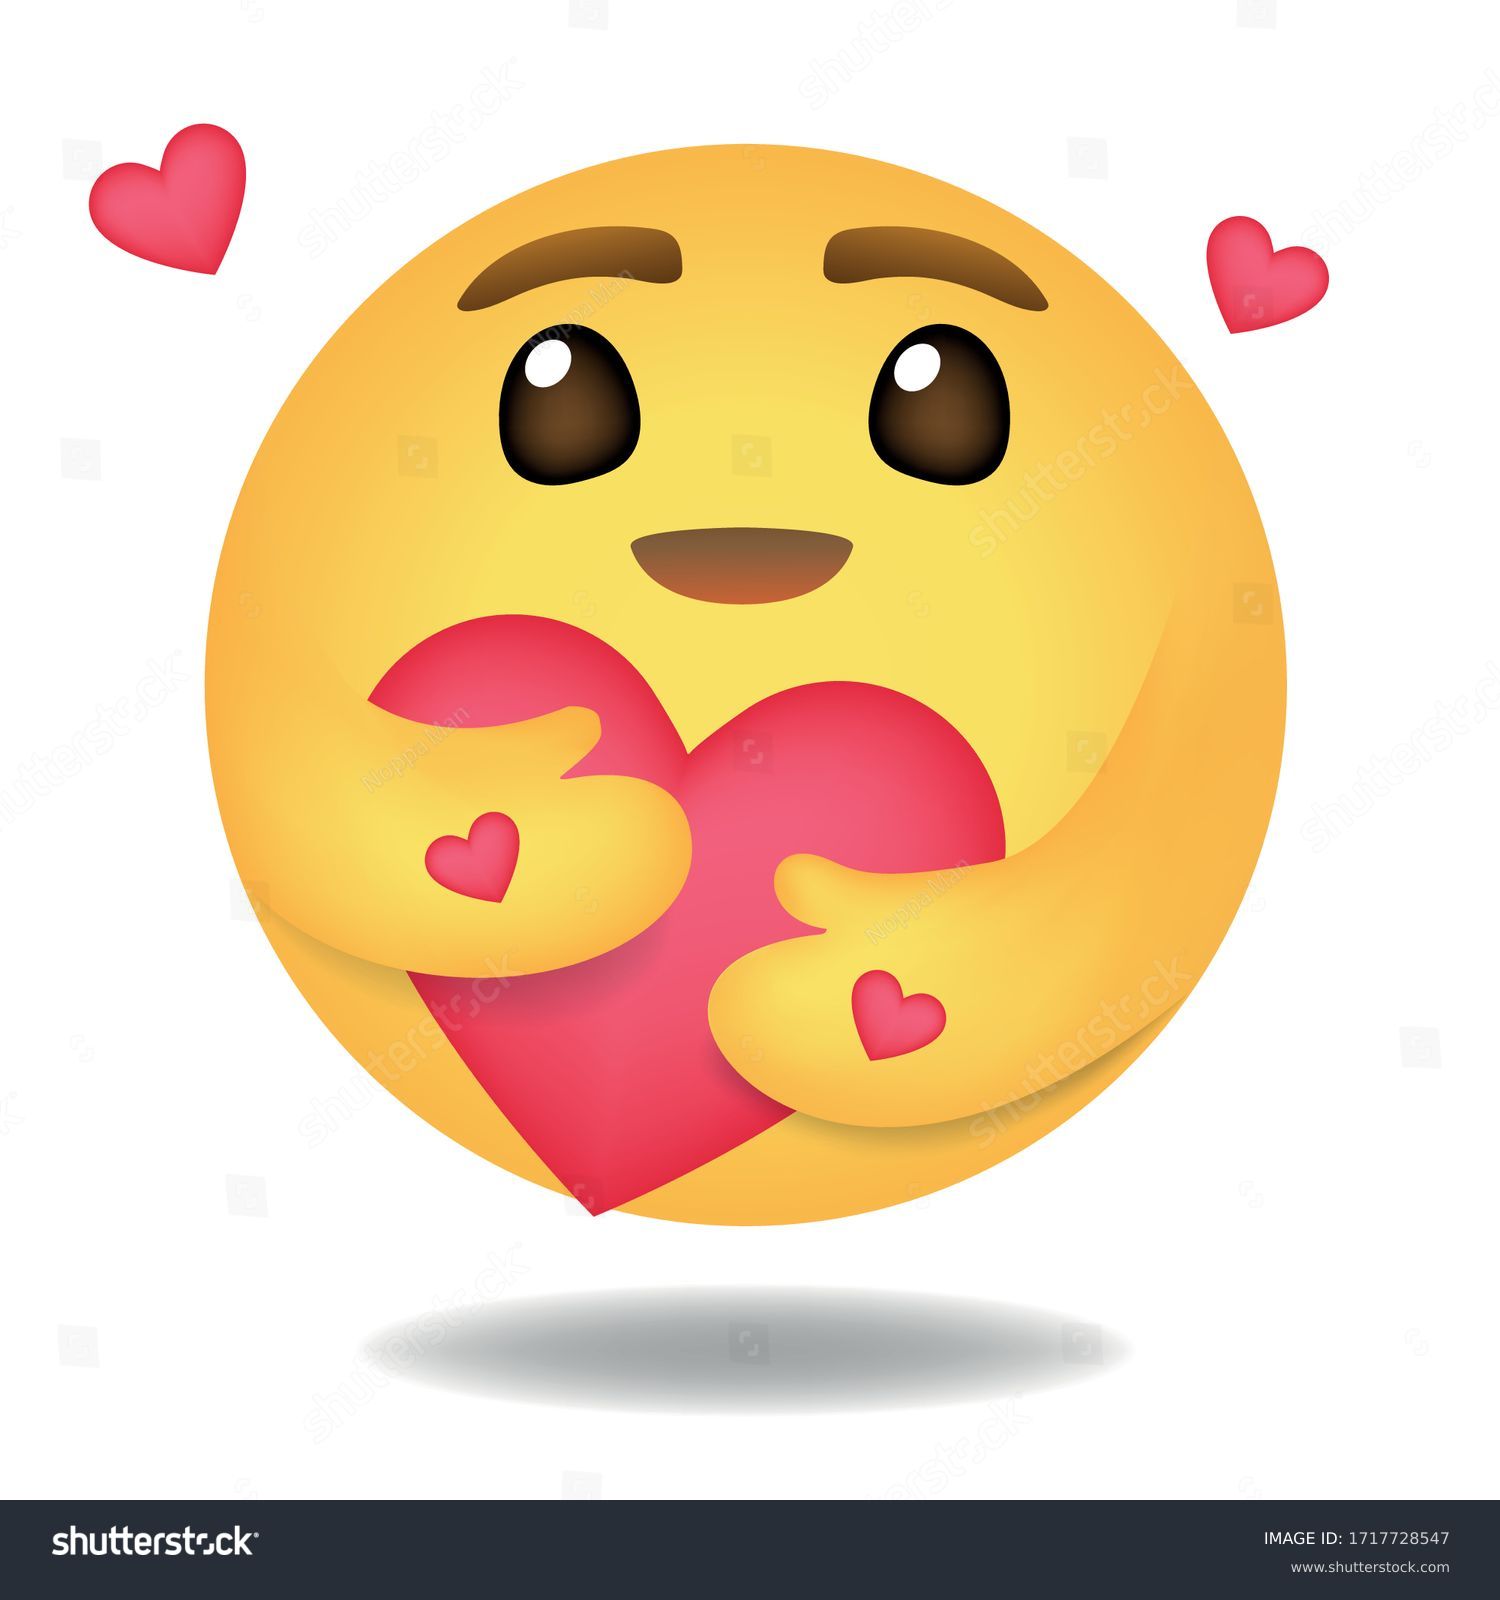 SVG of Emoji, Emoticon vector, Round Yellow cartoon hugging heart love design for use in chat, email, massage and comment. svg